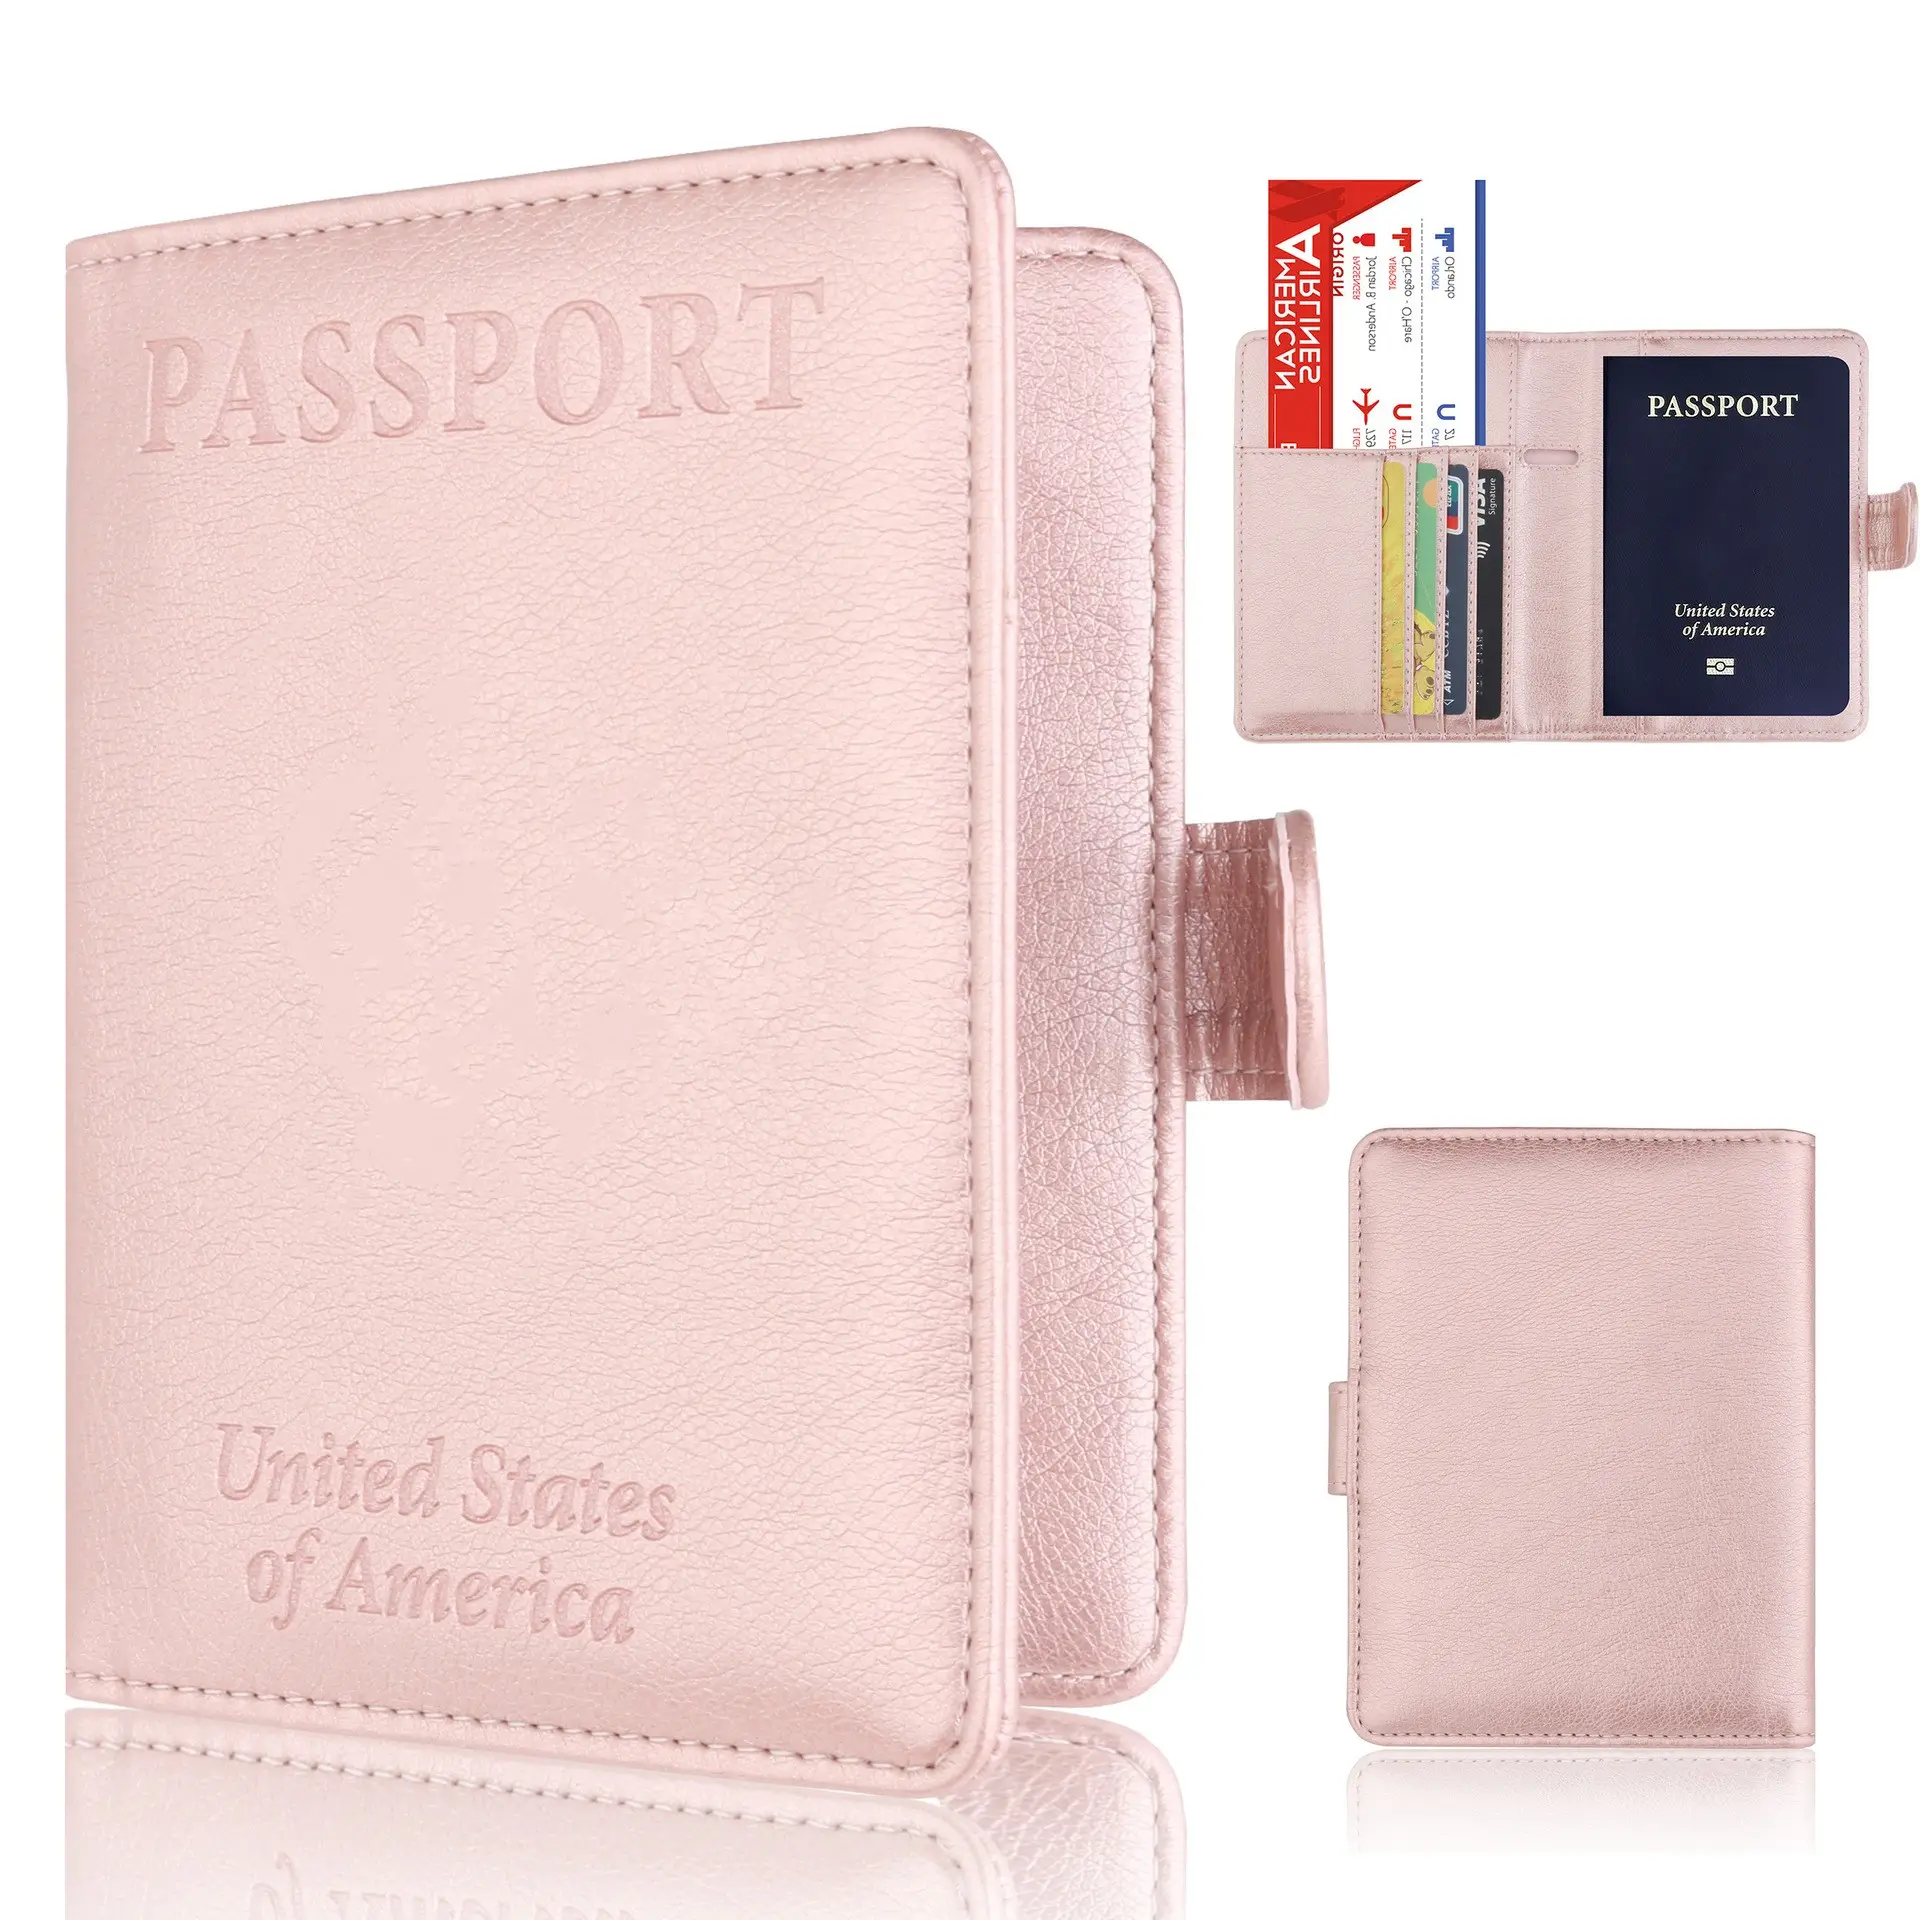 Yuhong American Passport Cover Pu Leather Passport Protection Cover Bank Card Set Multiple Card Ticket Wallet Cover